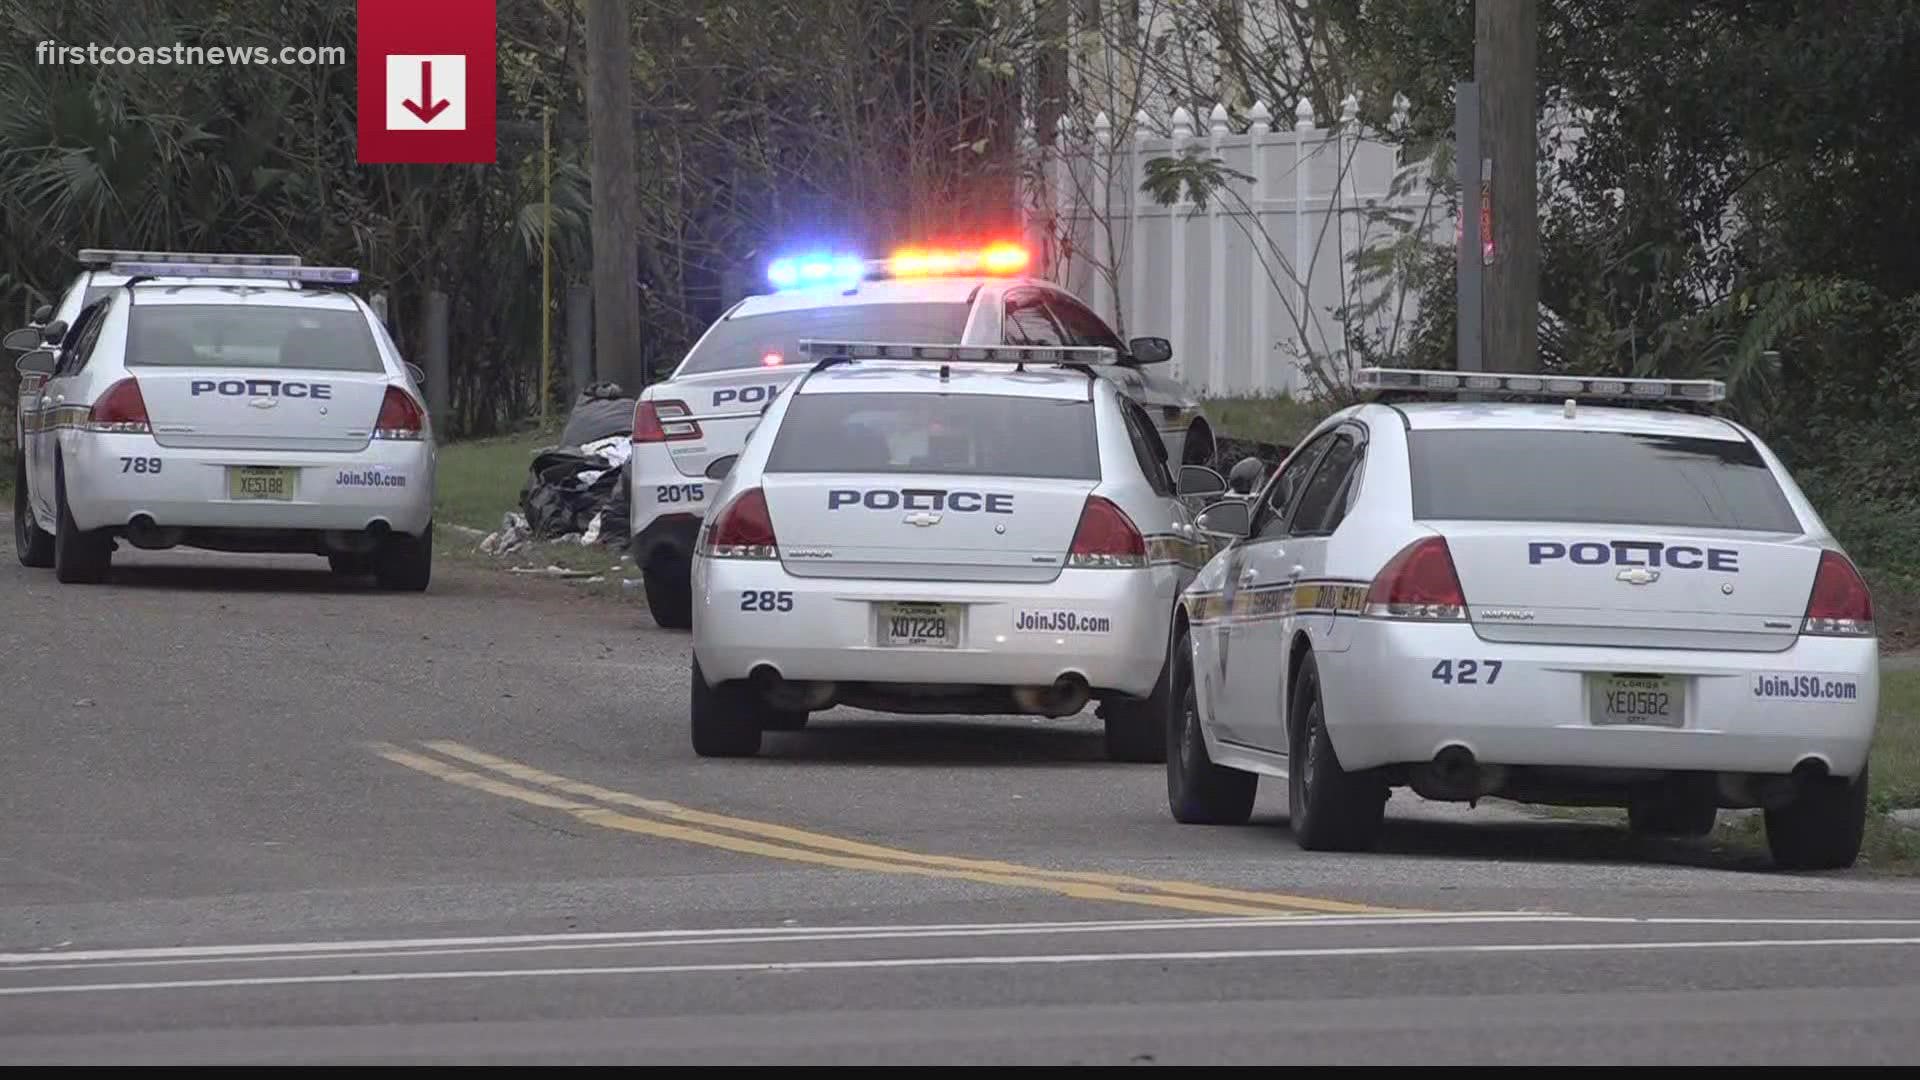 JSO said the shooting happened in the 5700 block of San Juan Avenue.